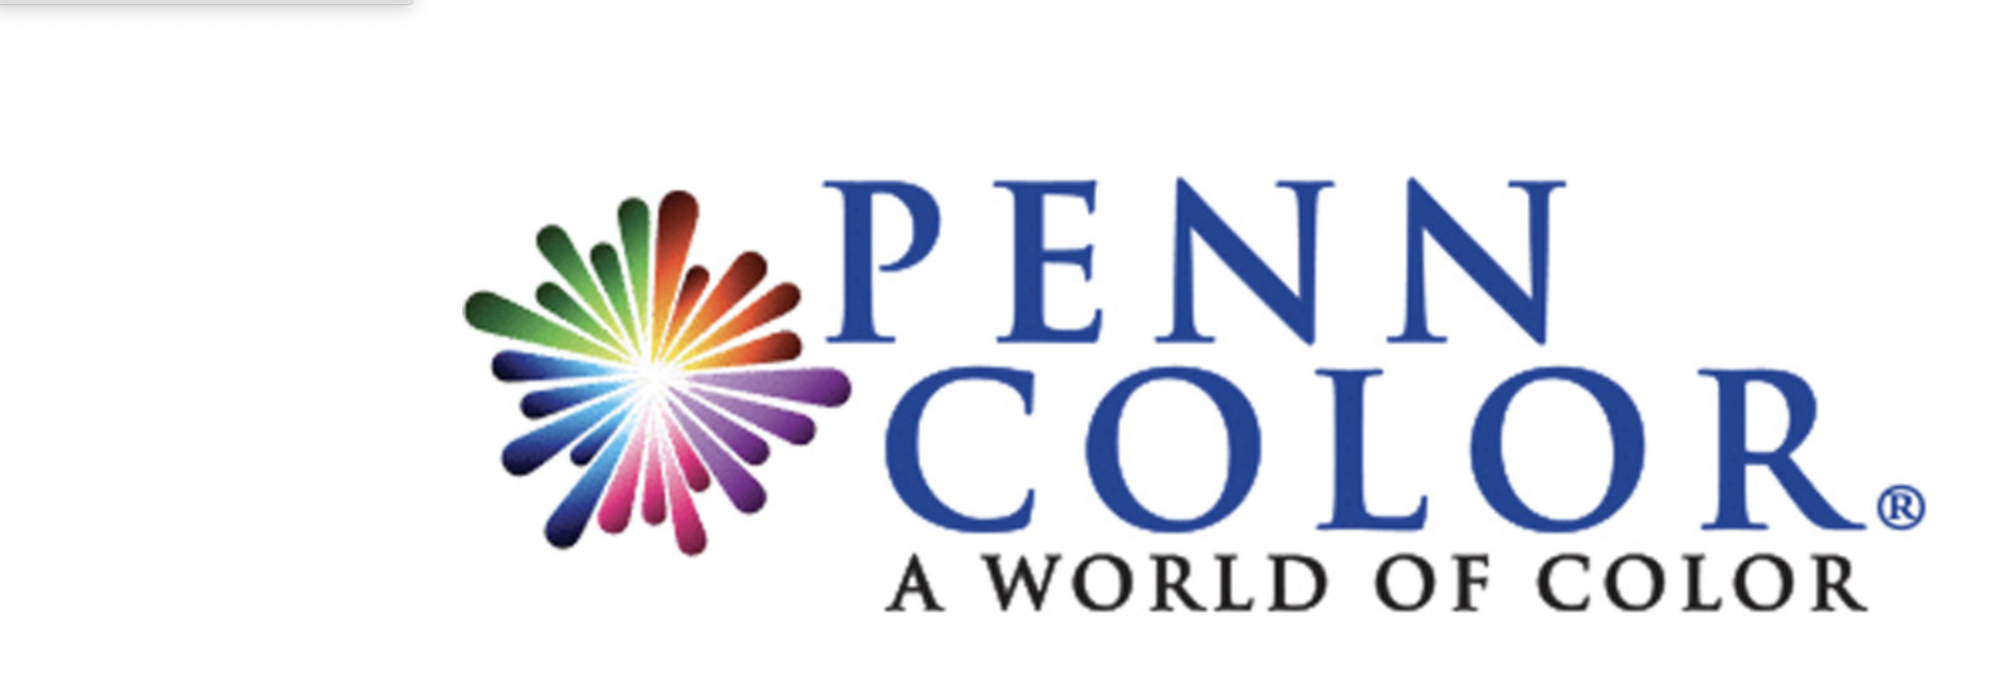 Penn Color Opens New Facility for Colorant & Additive Masterbatches in Thailand